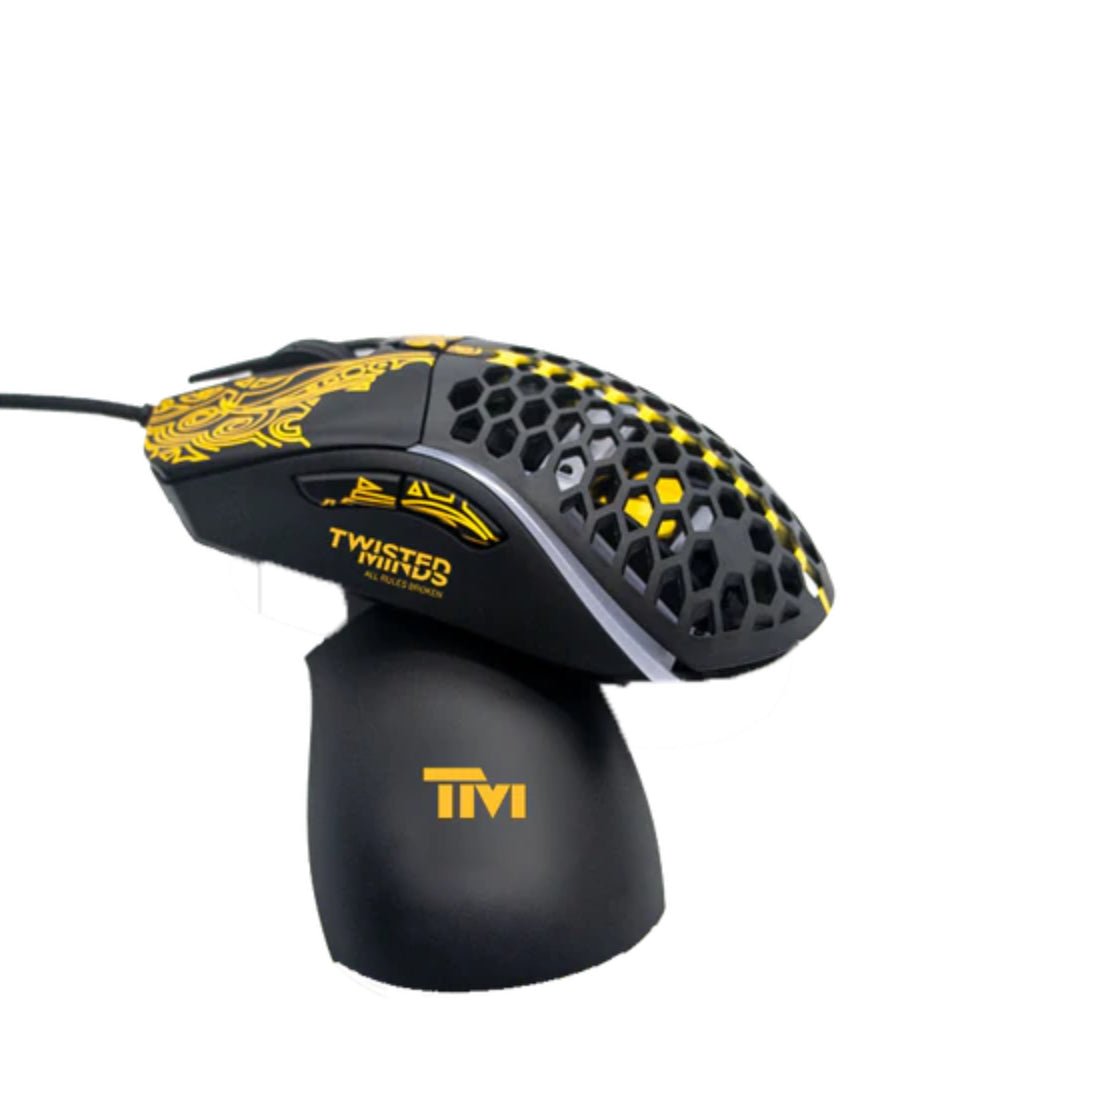 Twisted Minds CoolKnight RGB Wired Gaming Mouse - Black - Store 974 | ستور ٩٧٤